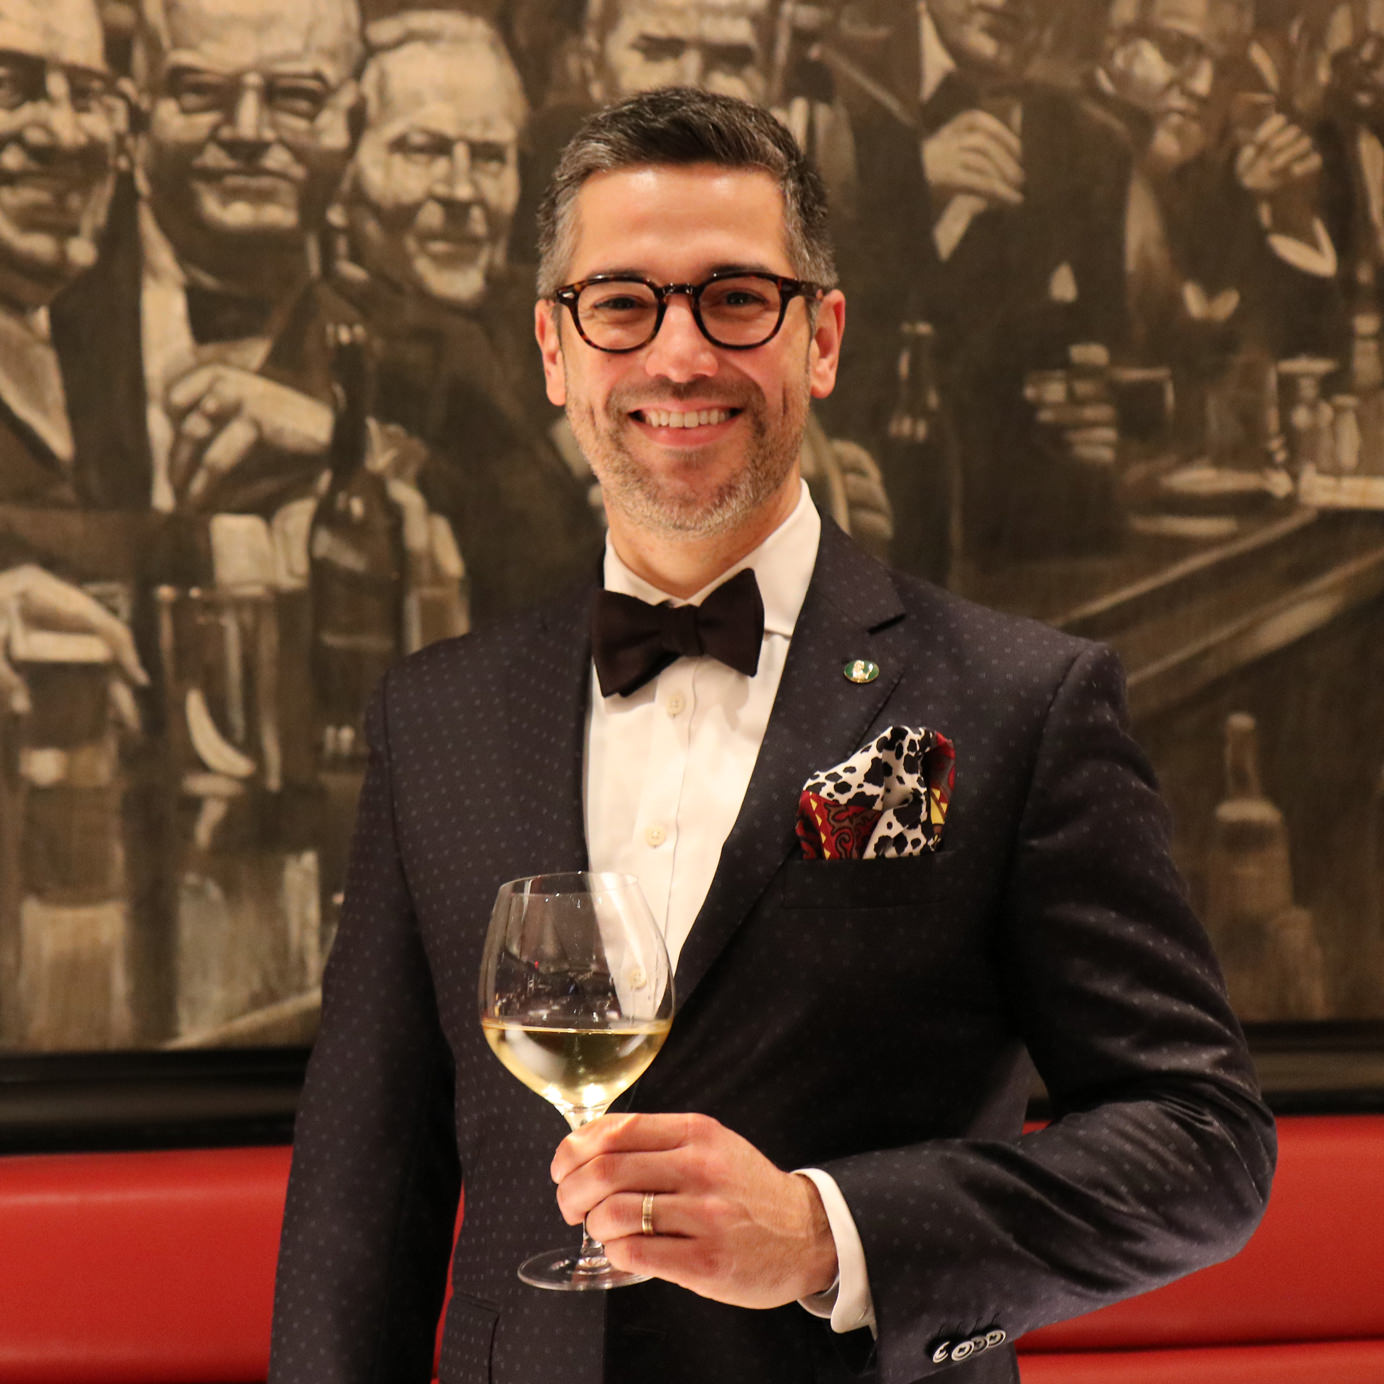 The Making of a Legend: NYC’s Best Dressed Somm Is Sick Of Museum Wine Lists